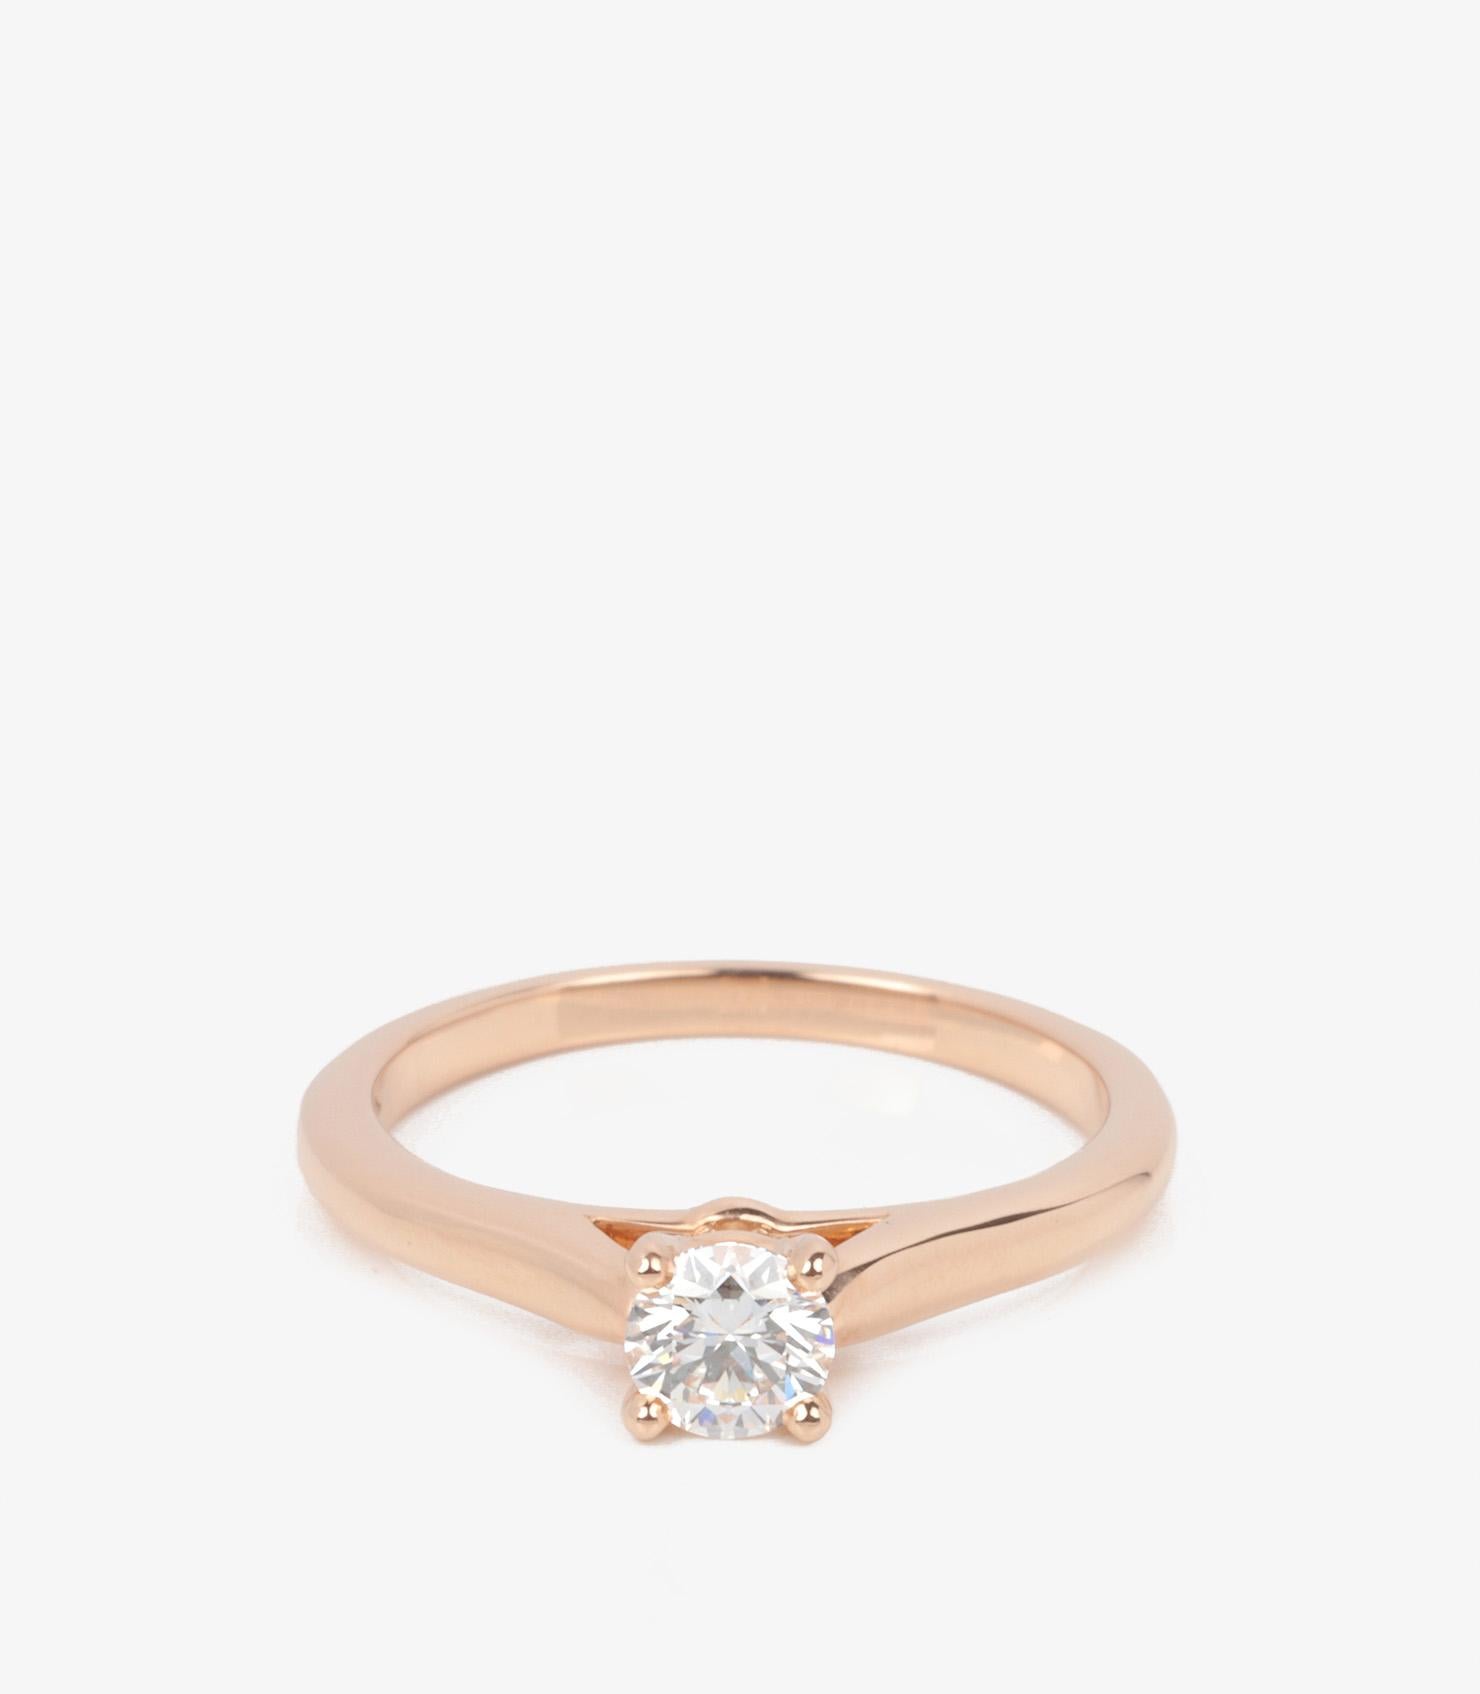 Cartier 0.24ct Brilliant Cut Solitaire Diamond 18ct Rose Gold 1895 Ring

Brand- Cartier
Model- 0.24ct Diamond 1895 Ring
Product Type- Ring
Serial Number- DG****
Age- Circa 2018
Accompanied By- Cartier Box, Certificate, GIA Diamond